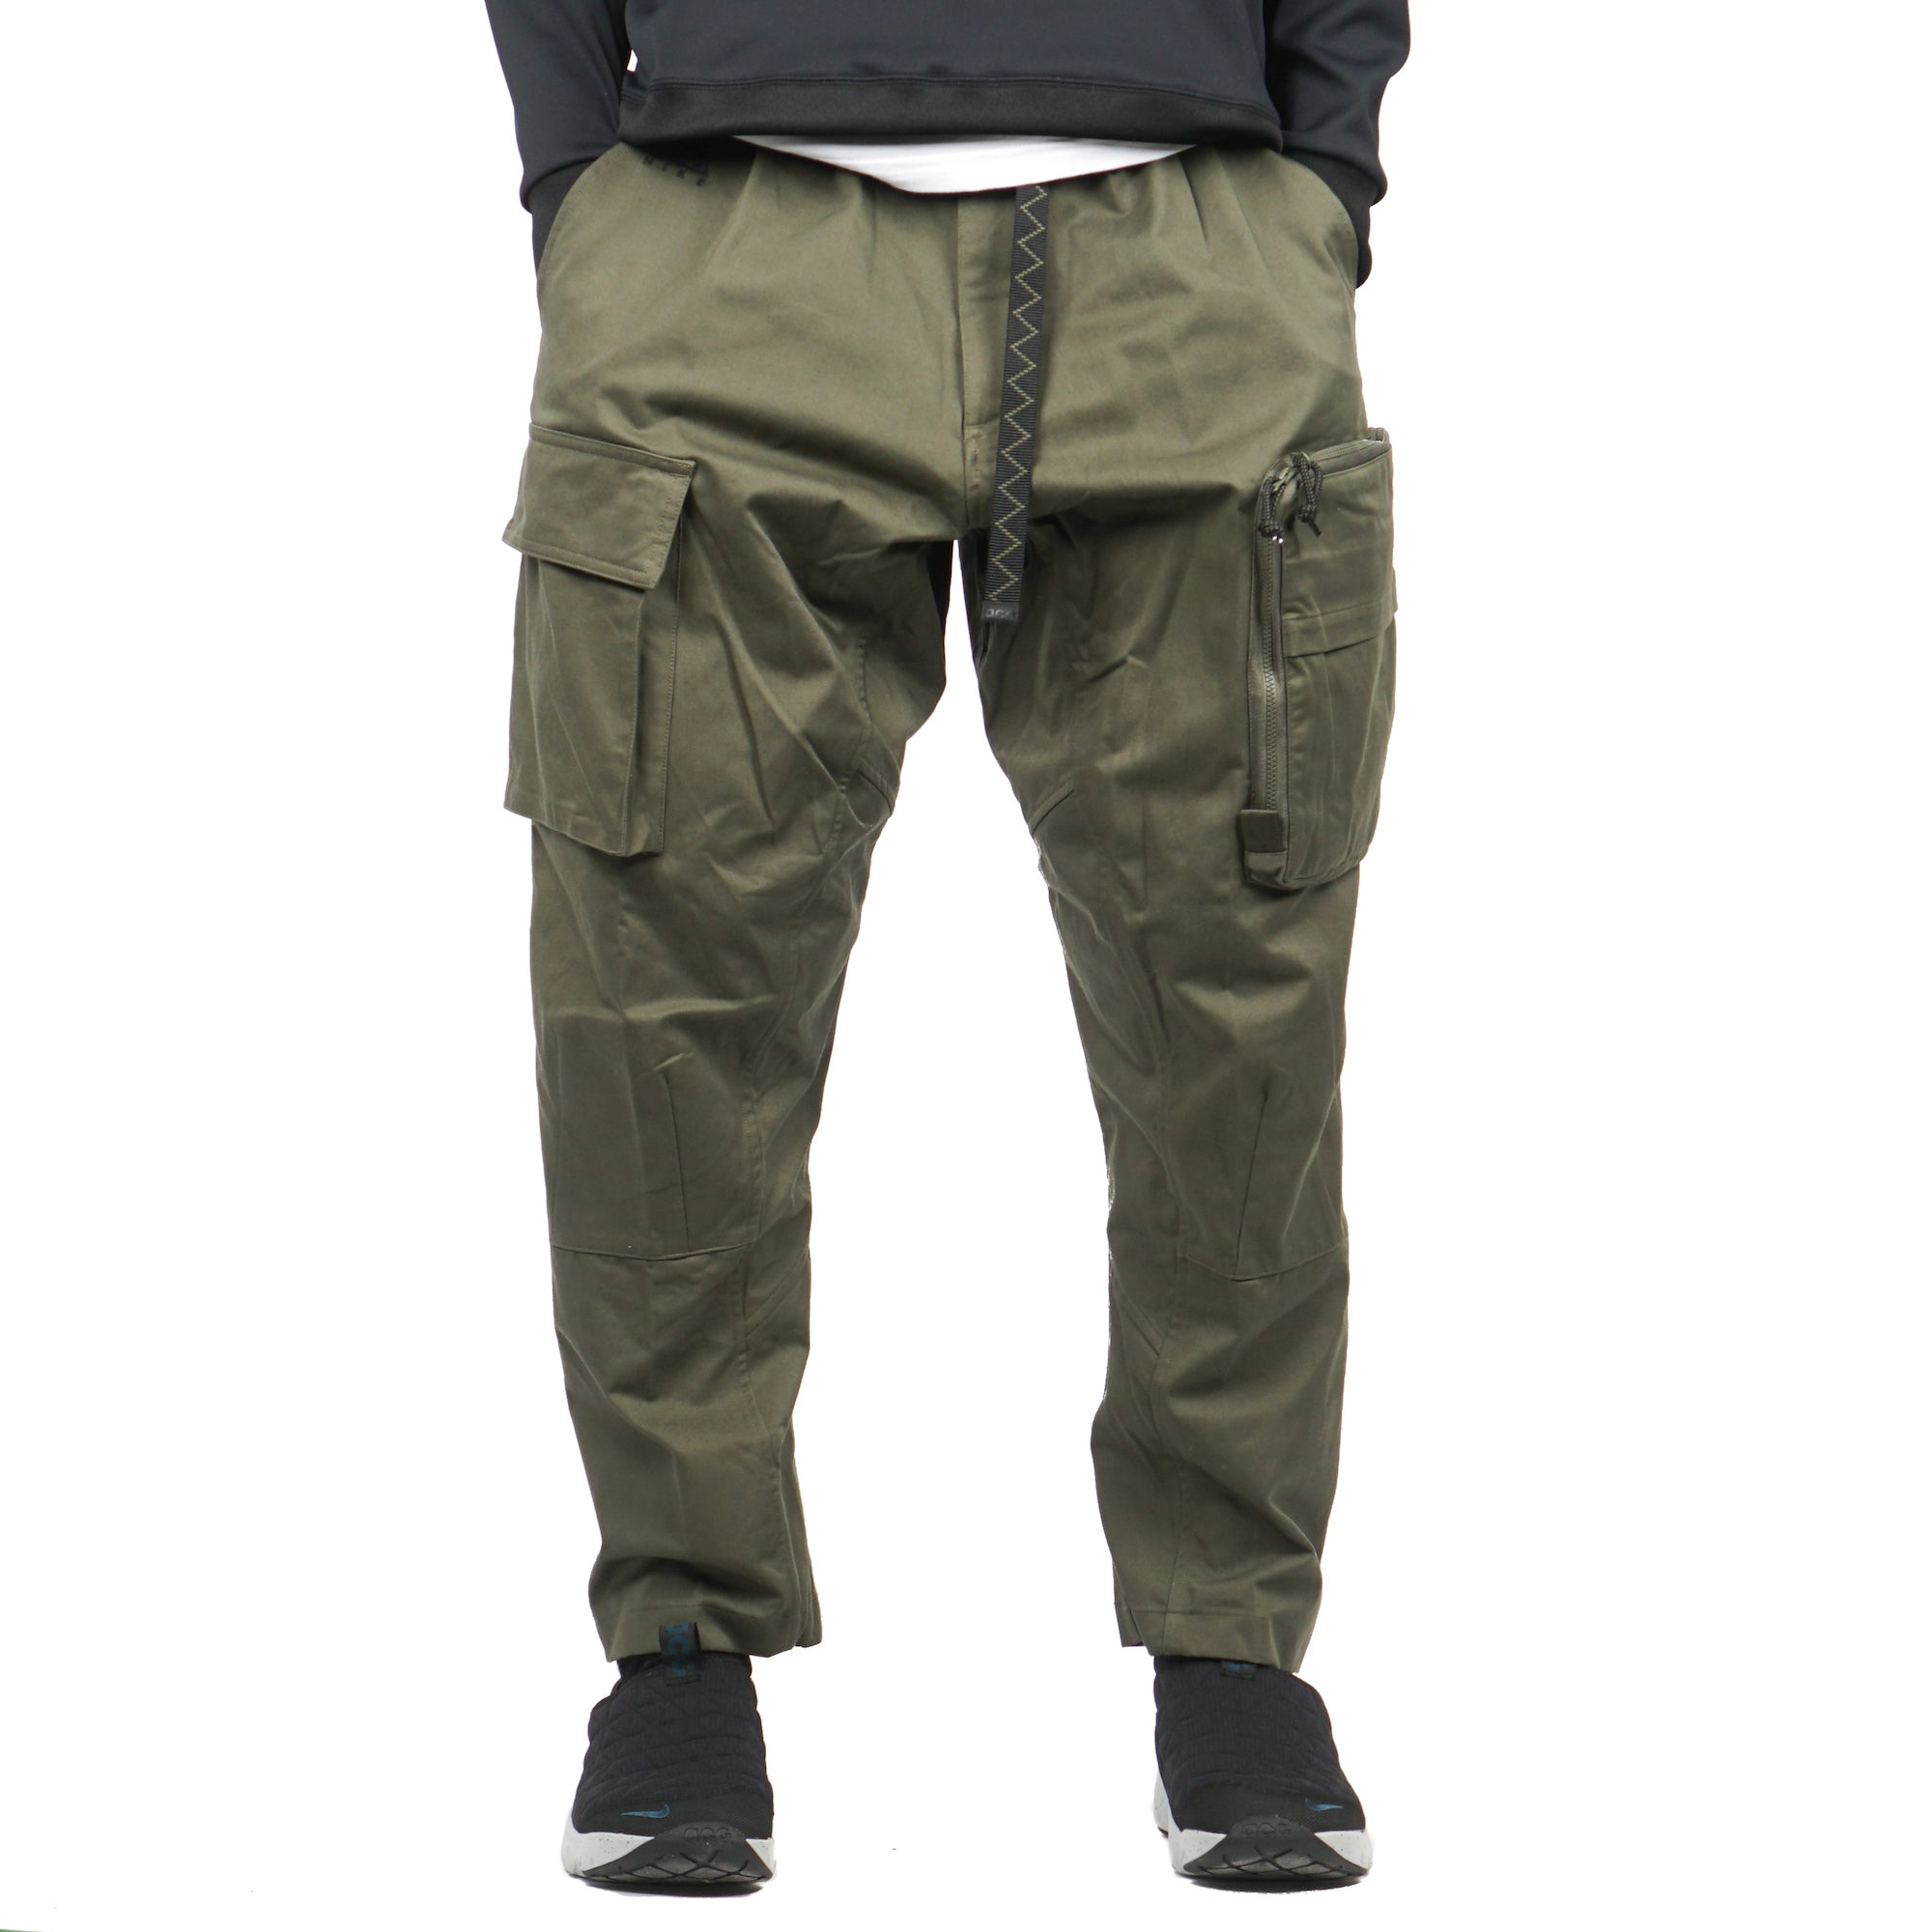 It's Time to Bring Back Cargo Pants